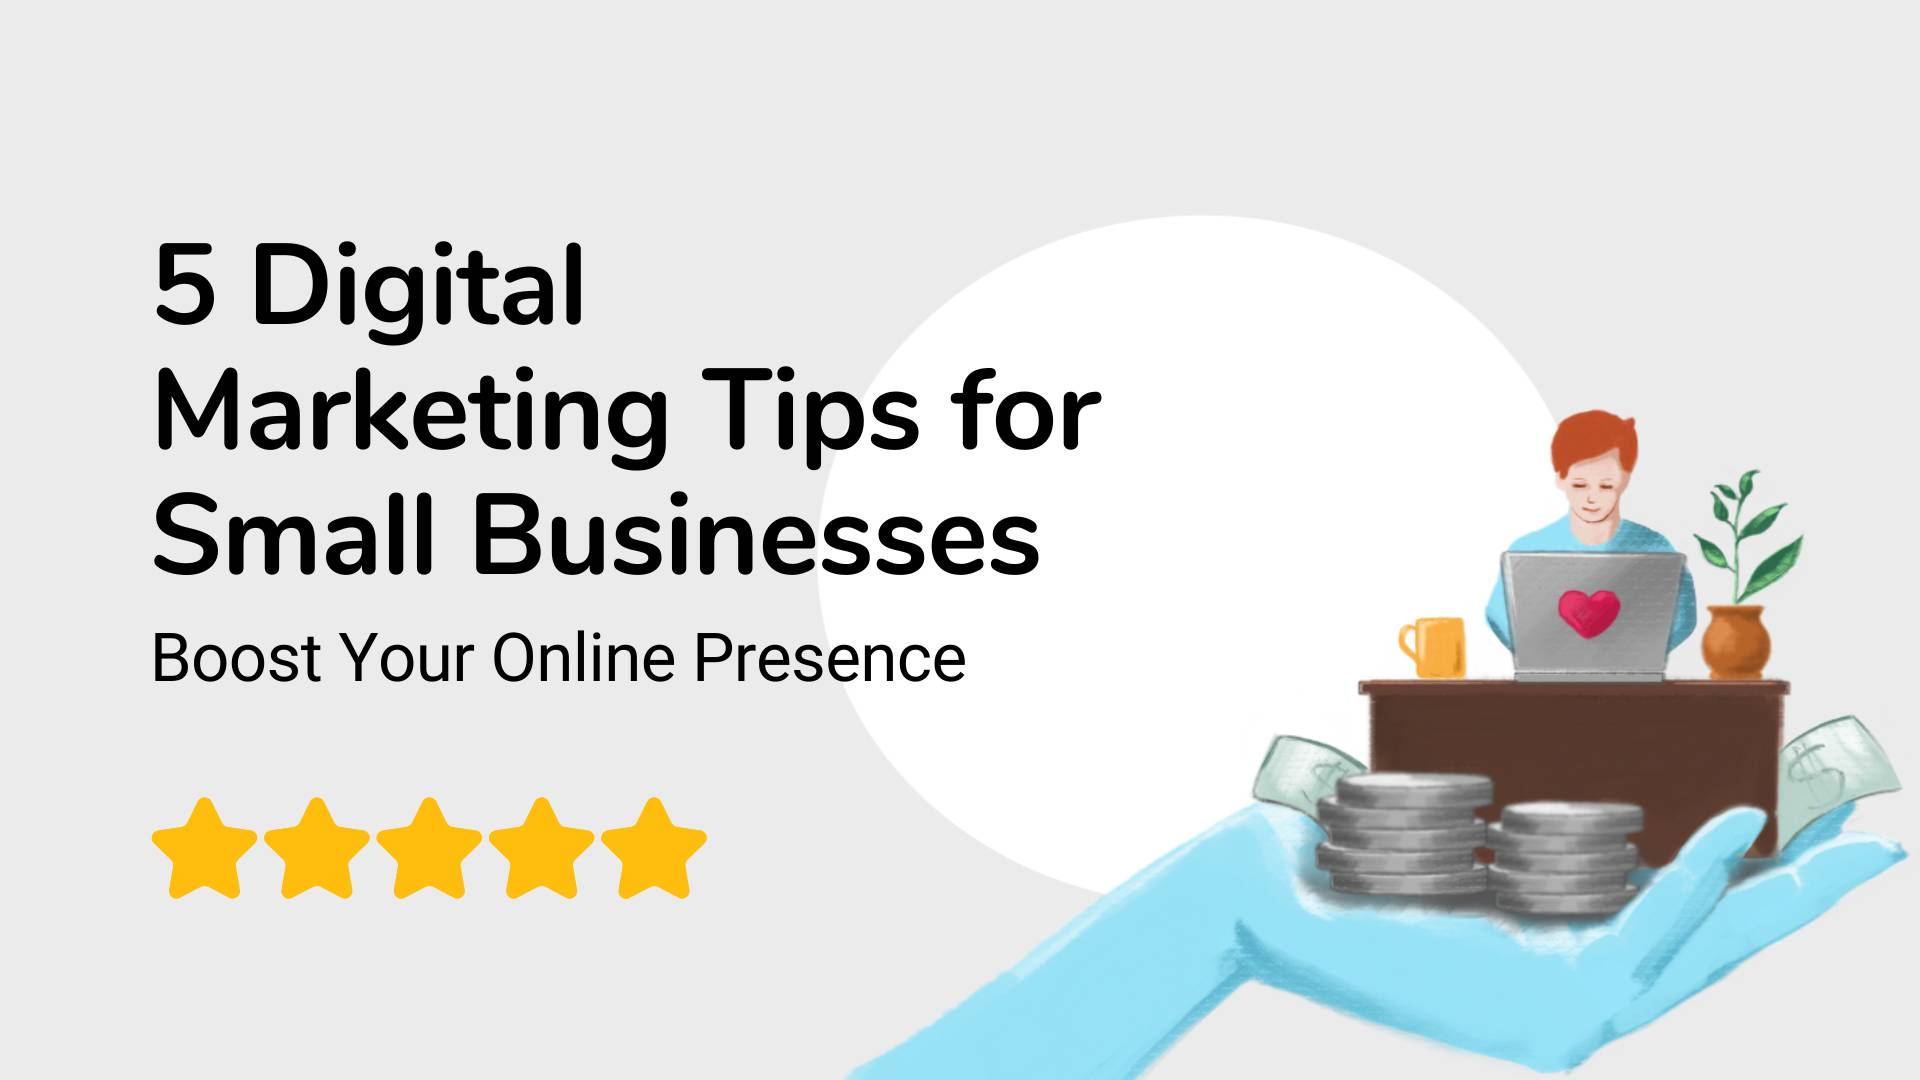 5 Digital Marketing Tips for Small Businesses